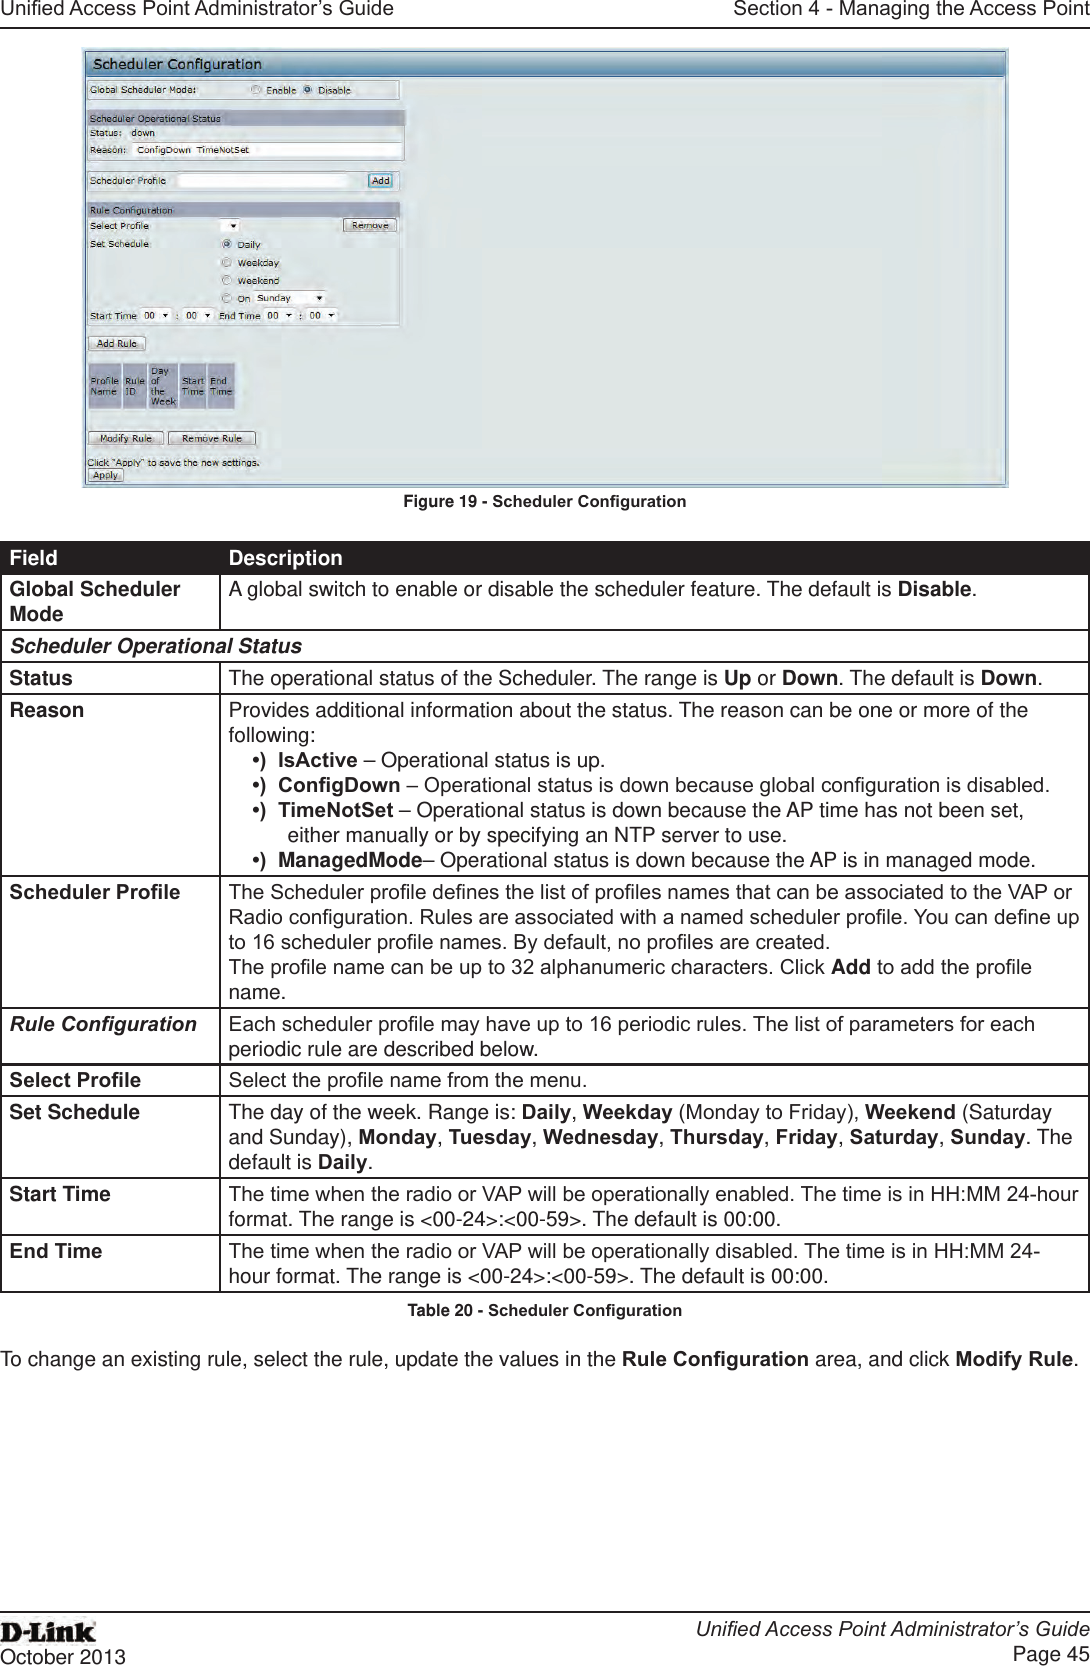 Unied Access Point Administrator’s GuideUnied Access Point Administrator’s GuidePage 45October 2013Section 4 - Managing the Access PointFigure 19 - Scheduler CongurationField DescriptionGlobal Scheduler Mode A global switch to enable or disable the scheduler feature. The default is Disable.Scheduler Operational StatusStatus The operational status of the Scheduler. The range is Up or Down. The default is Down.Reason Provides additional information about the status. The reason can be one or more of the following:•)  IsActive – Operational status is up.•)  CongDown – Operational status is down because global conguration is disabled.•)  TimeNotSet – Operational status is down because the AP time has not been set, either manually or by specifying an NTP server to use.•)  ManagedMode– Operational status is down because the AP is in managed mode.Scheduler Prole The Scheduler prole denes the list of proles names that can be associated to the VAP or Radio conguration. Rules are associated with a named scheduler prole. You can dene up to 16 scheduler prole names. By default, no proles are created.The prole name can be up to 32 alphanumeric characters. Click Add to add the prole name.Rule Conguration Each scheduler prole may have up to 16 periodic rules. The list of parameters for each periodic rule are described below.Select Prole Select the prole name from the menu.Set Schedule The day of the week. Range is: Daily, Weekday (Monday to Friday), Weekend (Saturday and Sunday), Monday, Tuesday, Wednesday, Thursday, Friday, Saturday, Sunday. The default is Daily.Start Time The time when the radio or VAP will be operationally enabled. The time is in HH:MM 24-hour format. The range is &lt;00-24&gt;:&lt;00-59&gt;. The default is 00:00.End Time The time when the radio or VAP will be operationally disabled. The time is in HH:MM 24-hour format. The range is &lt;00-24&gt;:&lt;00-59&gt;. The default is 00:00.Table 20 - Scheduler CongurationTo change an existing rule, select the rule, update the values in the Rule Conguration area, and click Modify Rule.